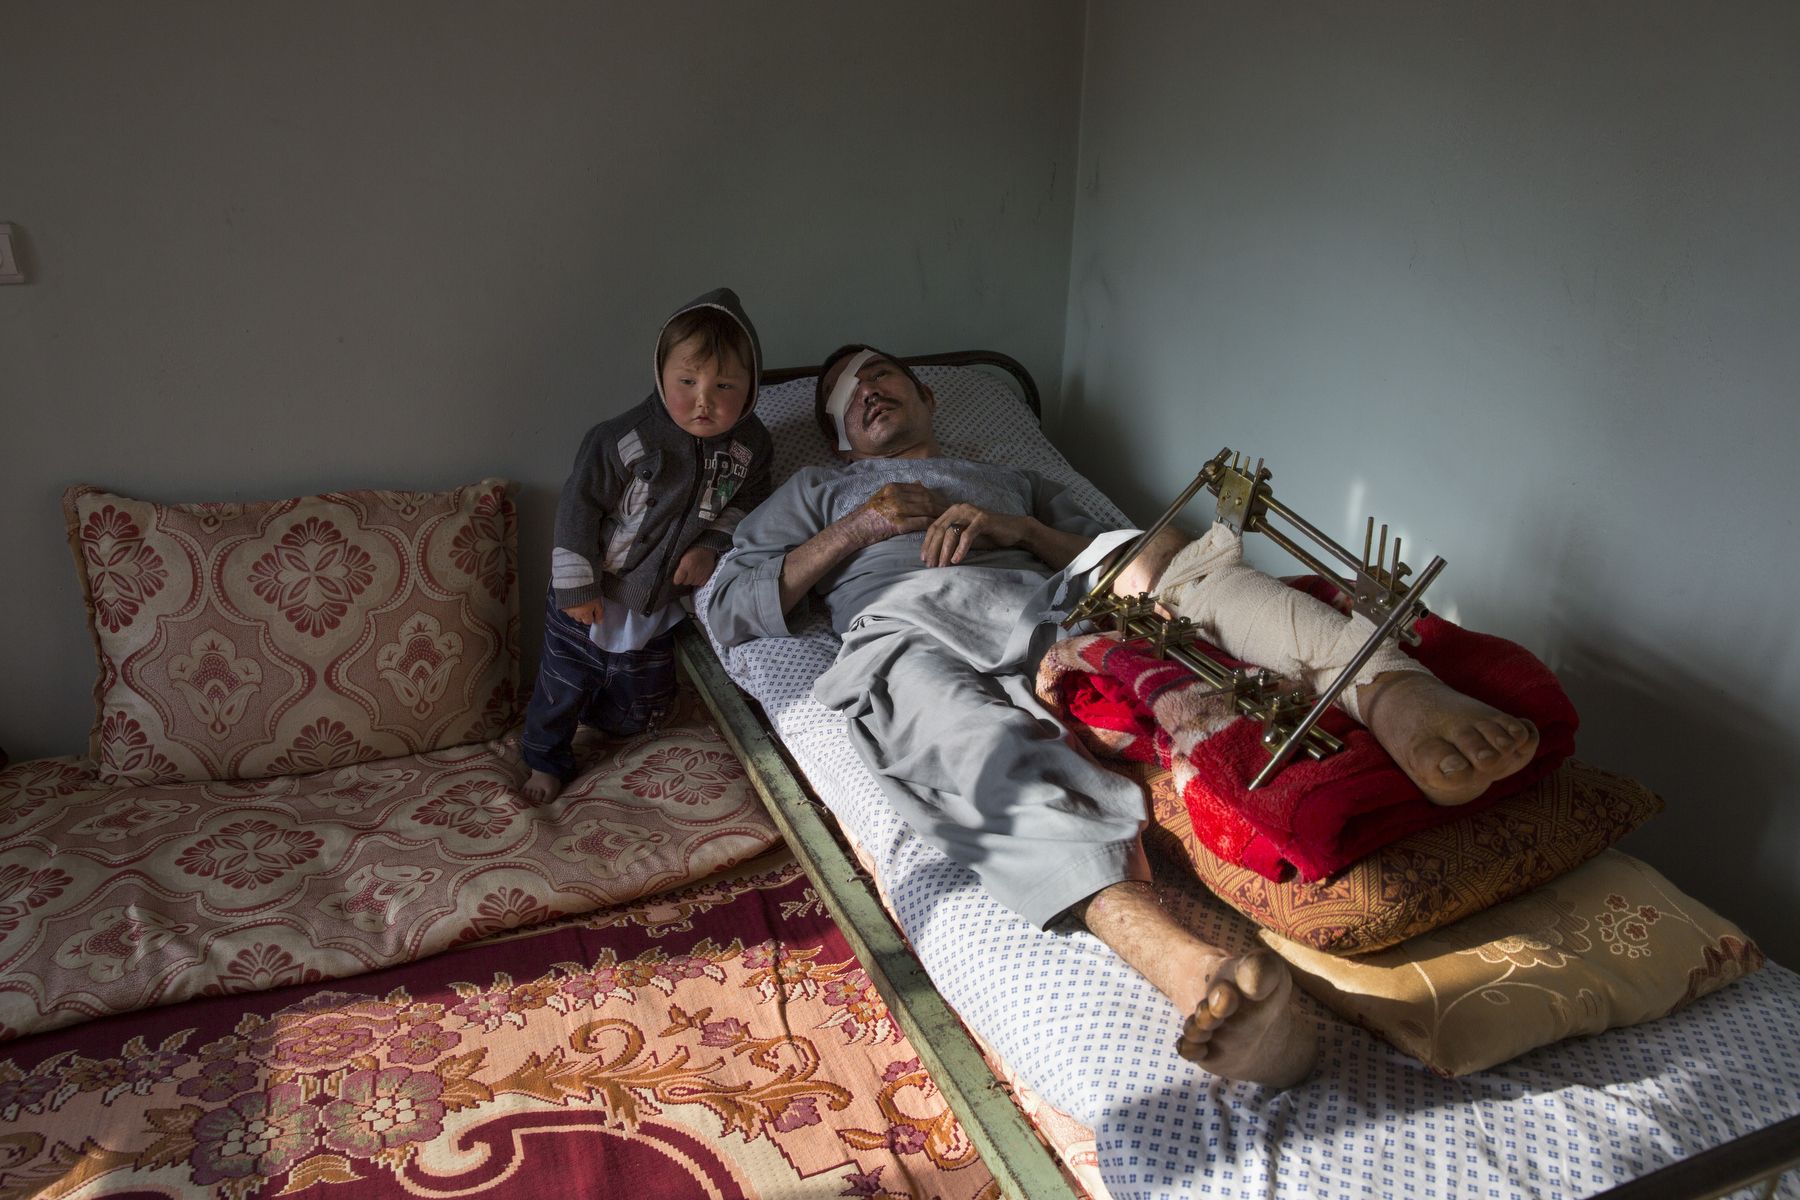 Abdul Hussain Ayoobi, is seen at home with his son Ali Akbar, 3. Abdul, a carpenter was one of the seriously wounded victims for Tolo TV. The employees had finished a day’s work at Tolo TV, one of Afghanistan’s largest entertainment channels, when they boarded a company bus in Kabul on April 9, 2016. It was rammed by a car driven by a Taliban suicide bomber. Seven people were killed and at least 25 wounded in the attack. Image by Paula Bronstein. Afghanistan, 2016.